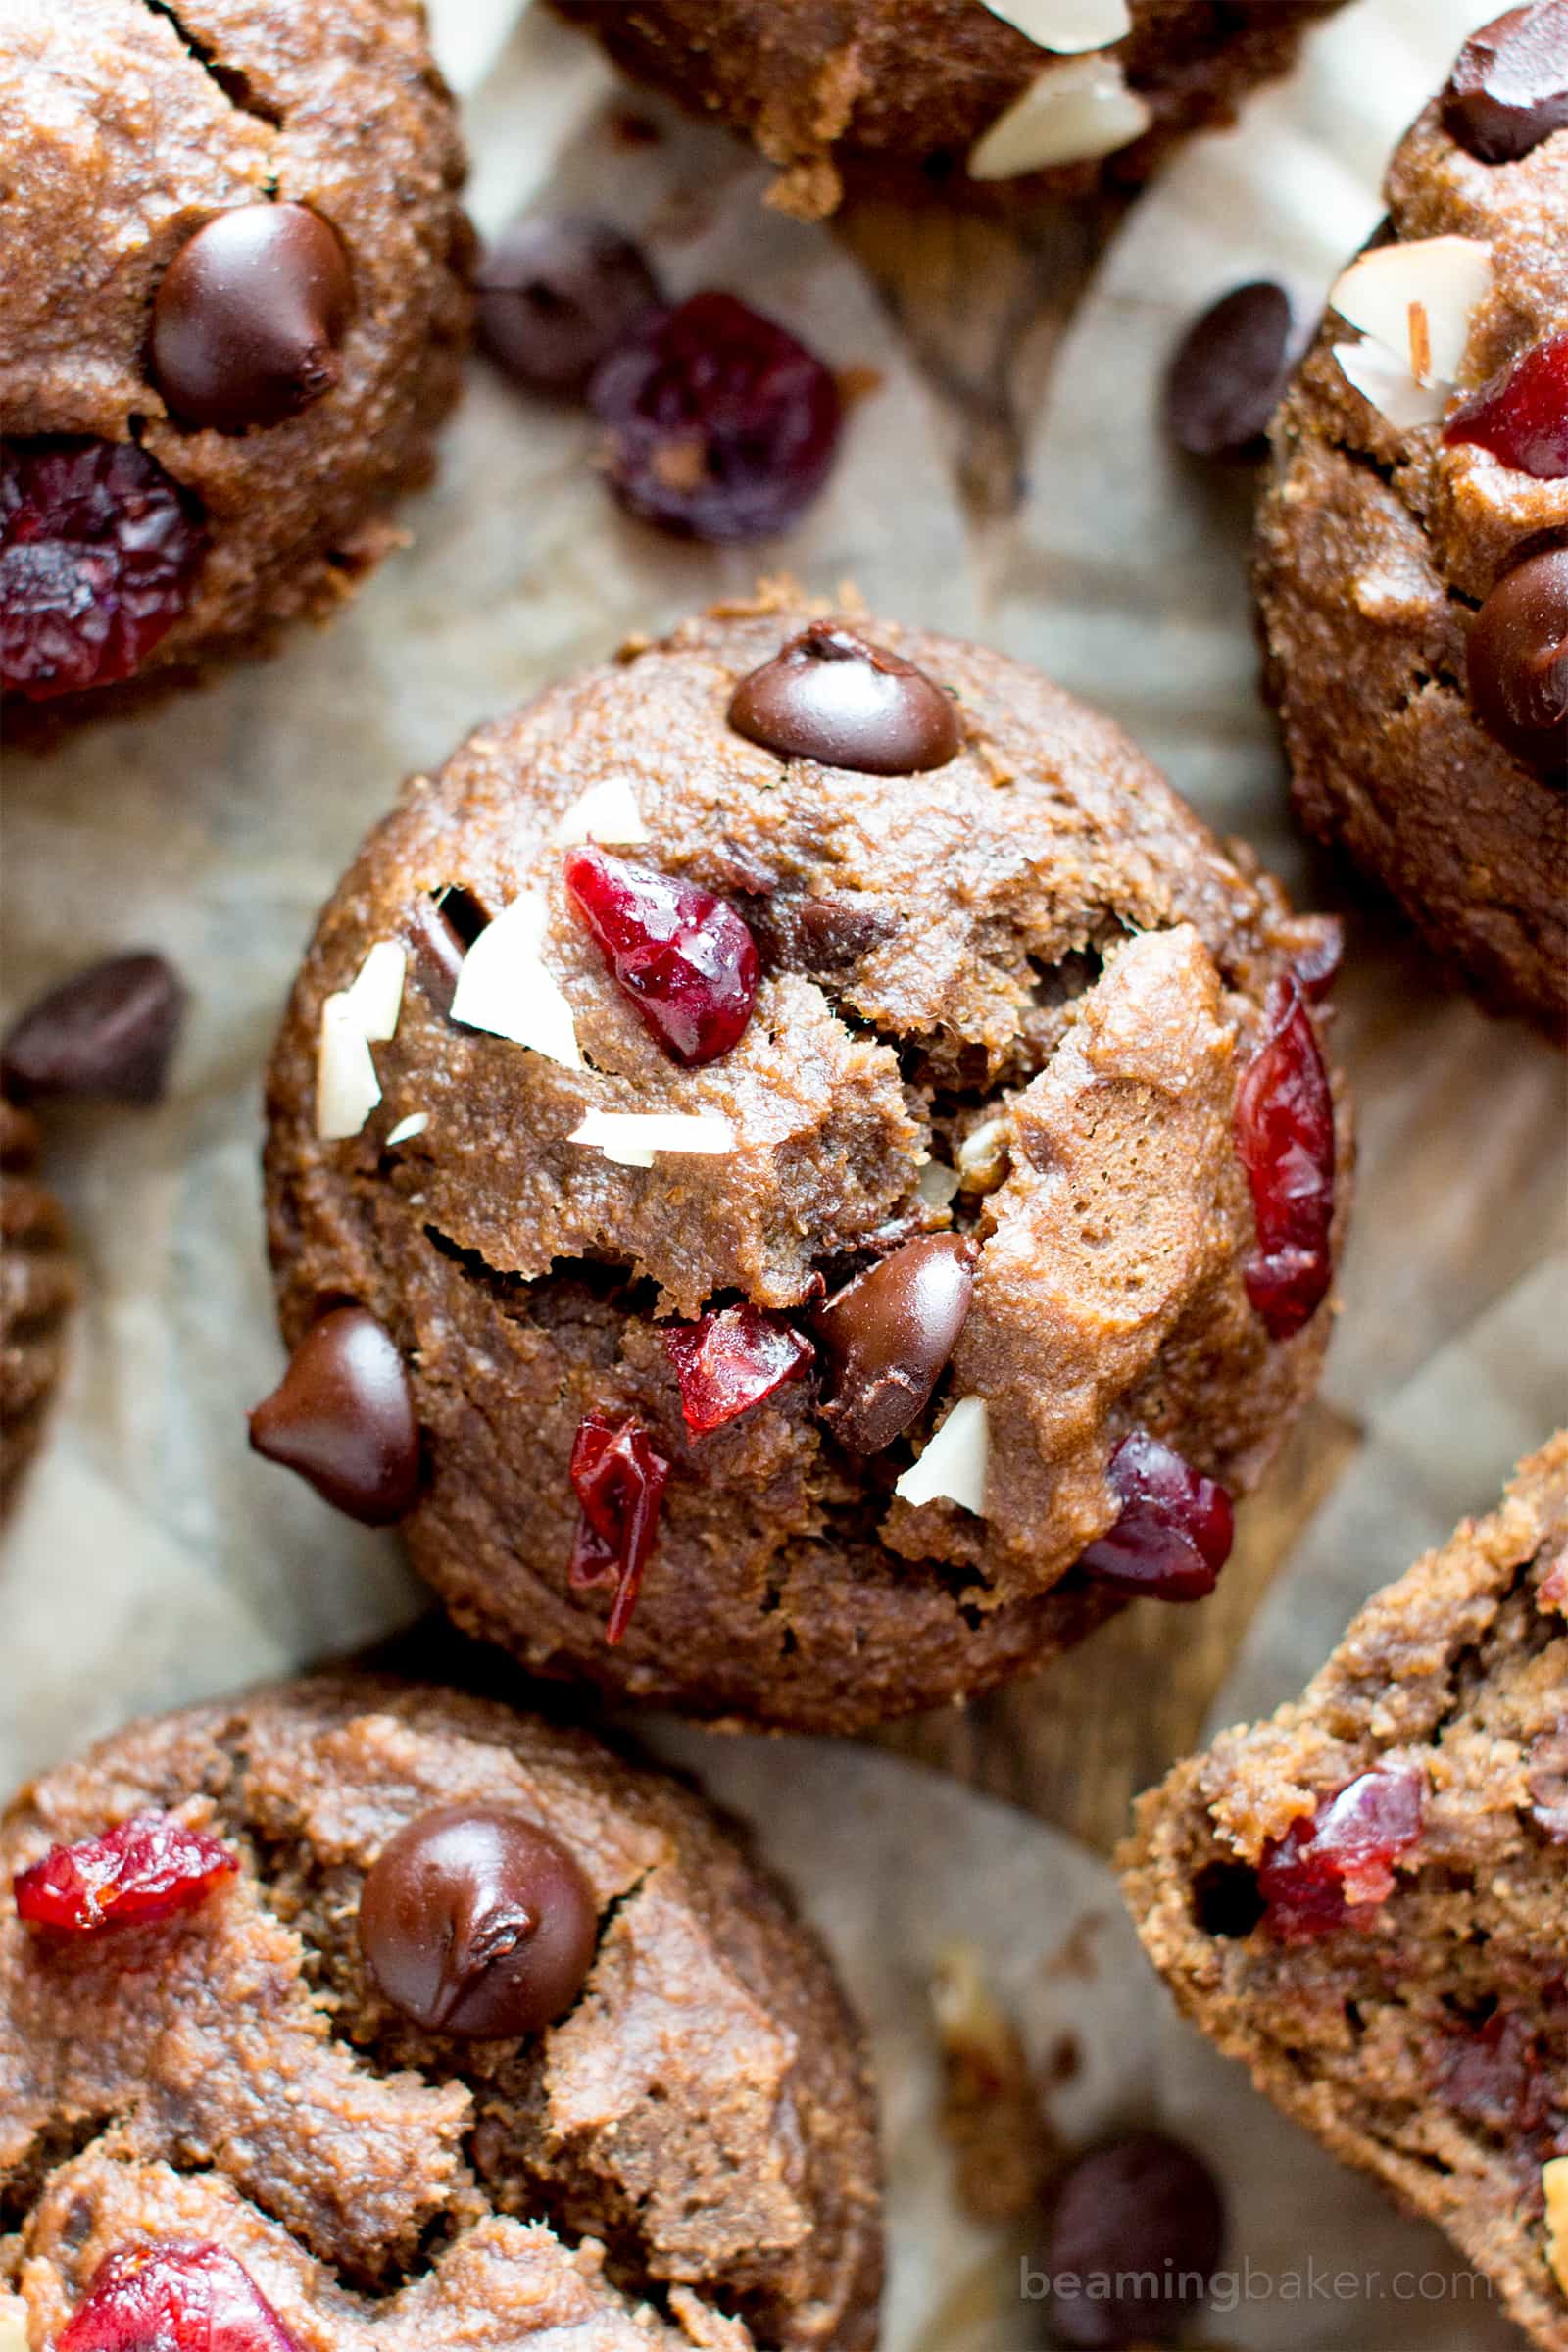 Chocolate Cranberry Almond Banana Muffins Recipe (V, GF): delightfully warm and cozy chocolate banana muffins packed with juicy cranberries and almonds. #Vegan #GlutenFree #DairyFree #Healthy #OneBowl | BeamingBaker.com